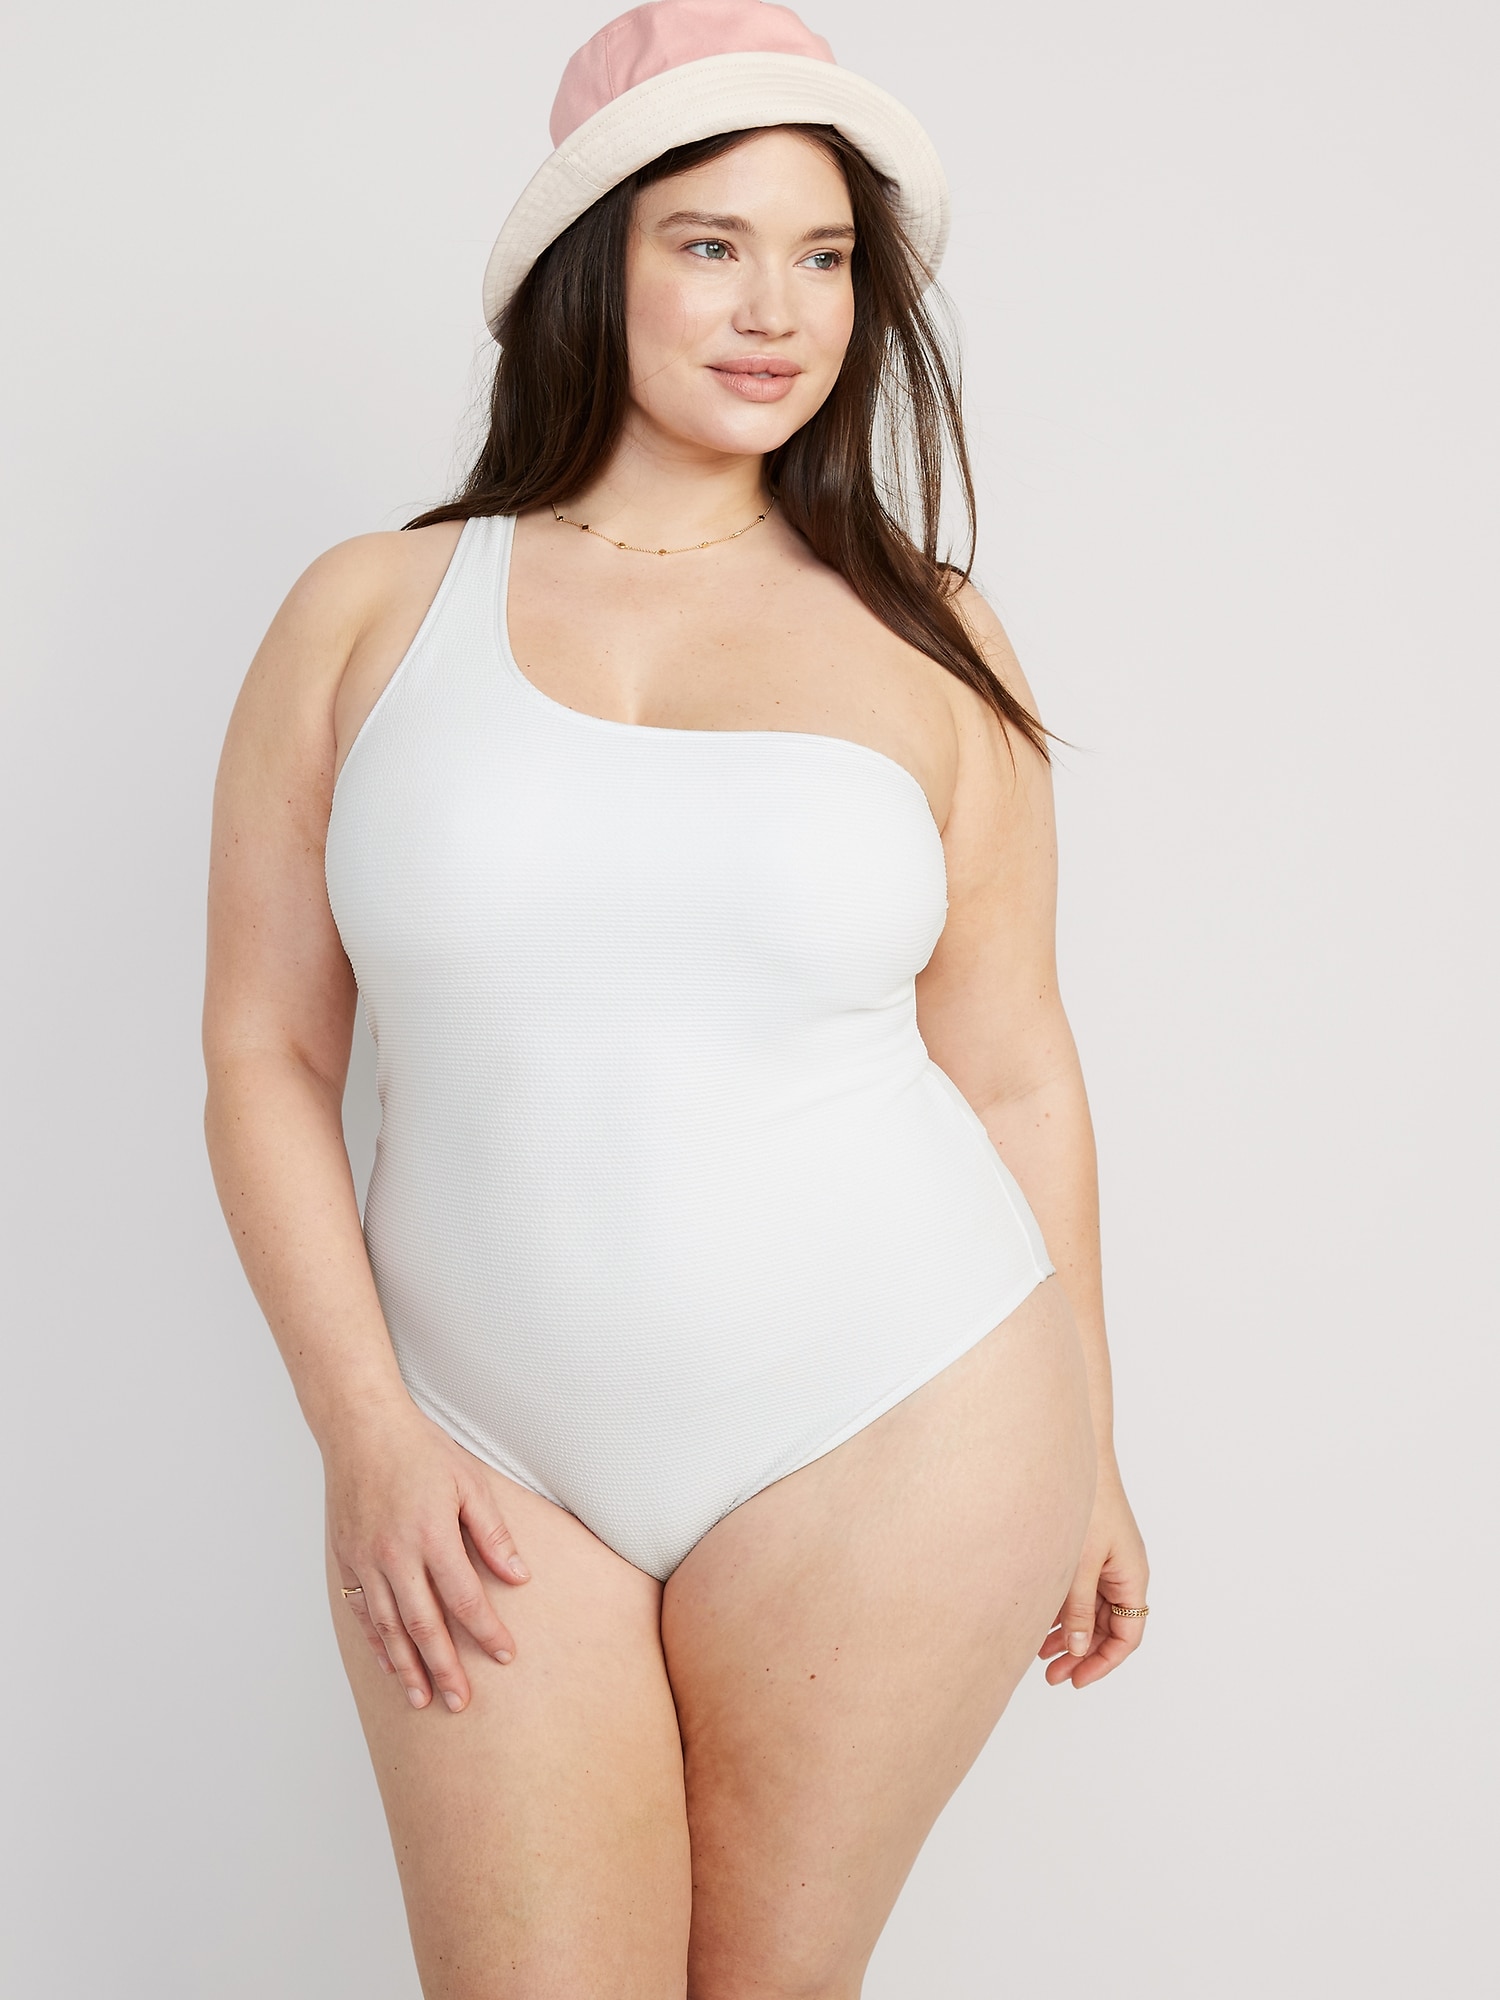  Women's White Bathing Suits